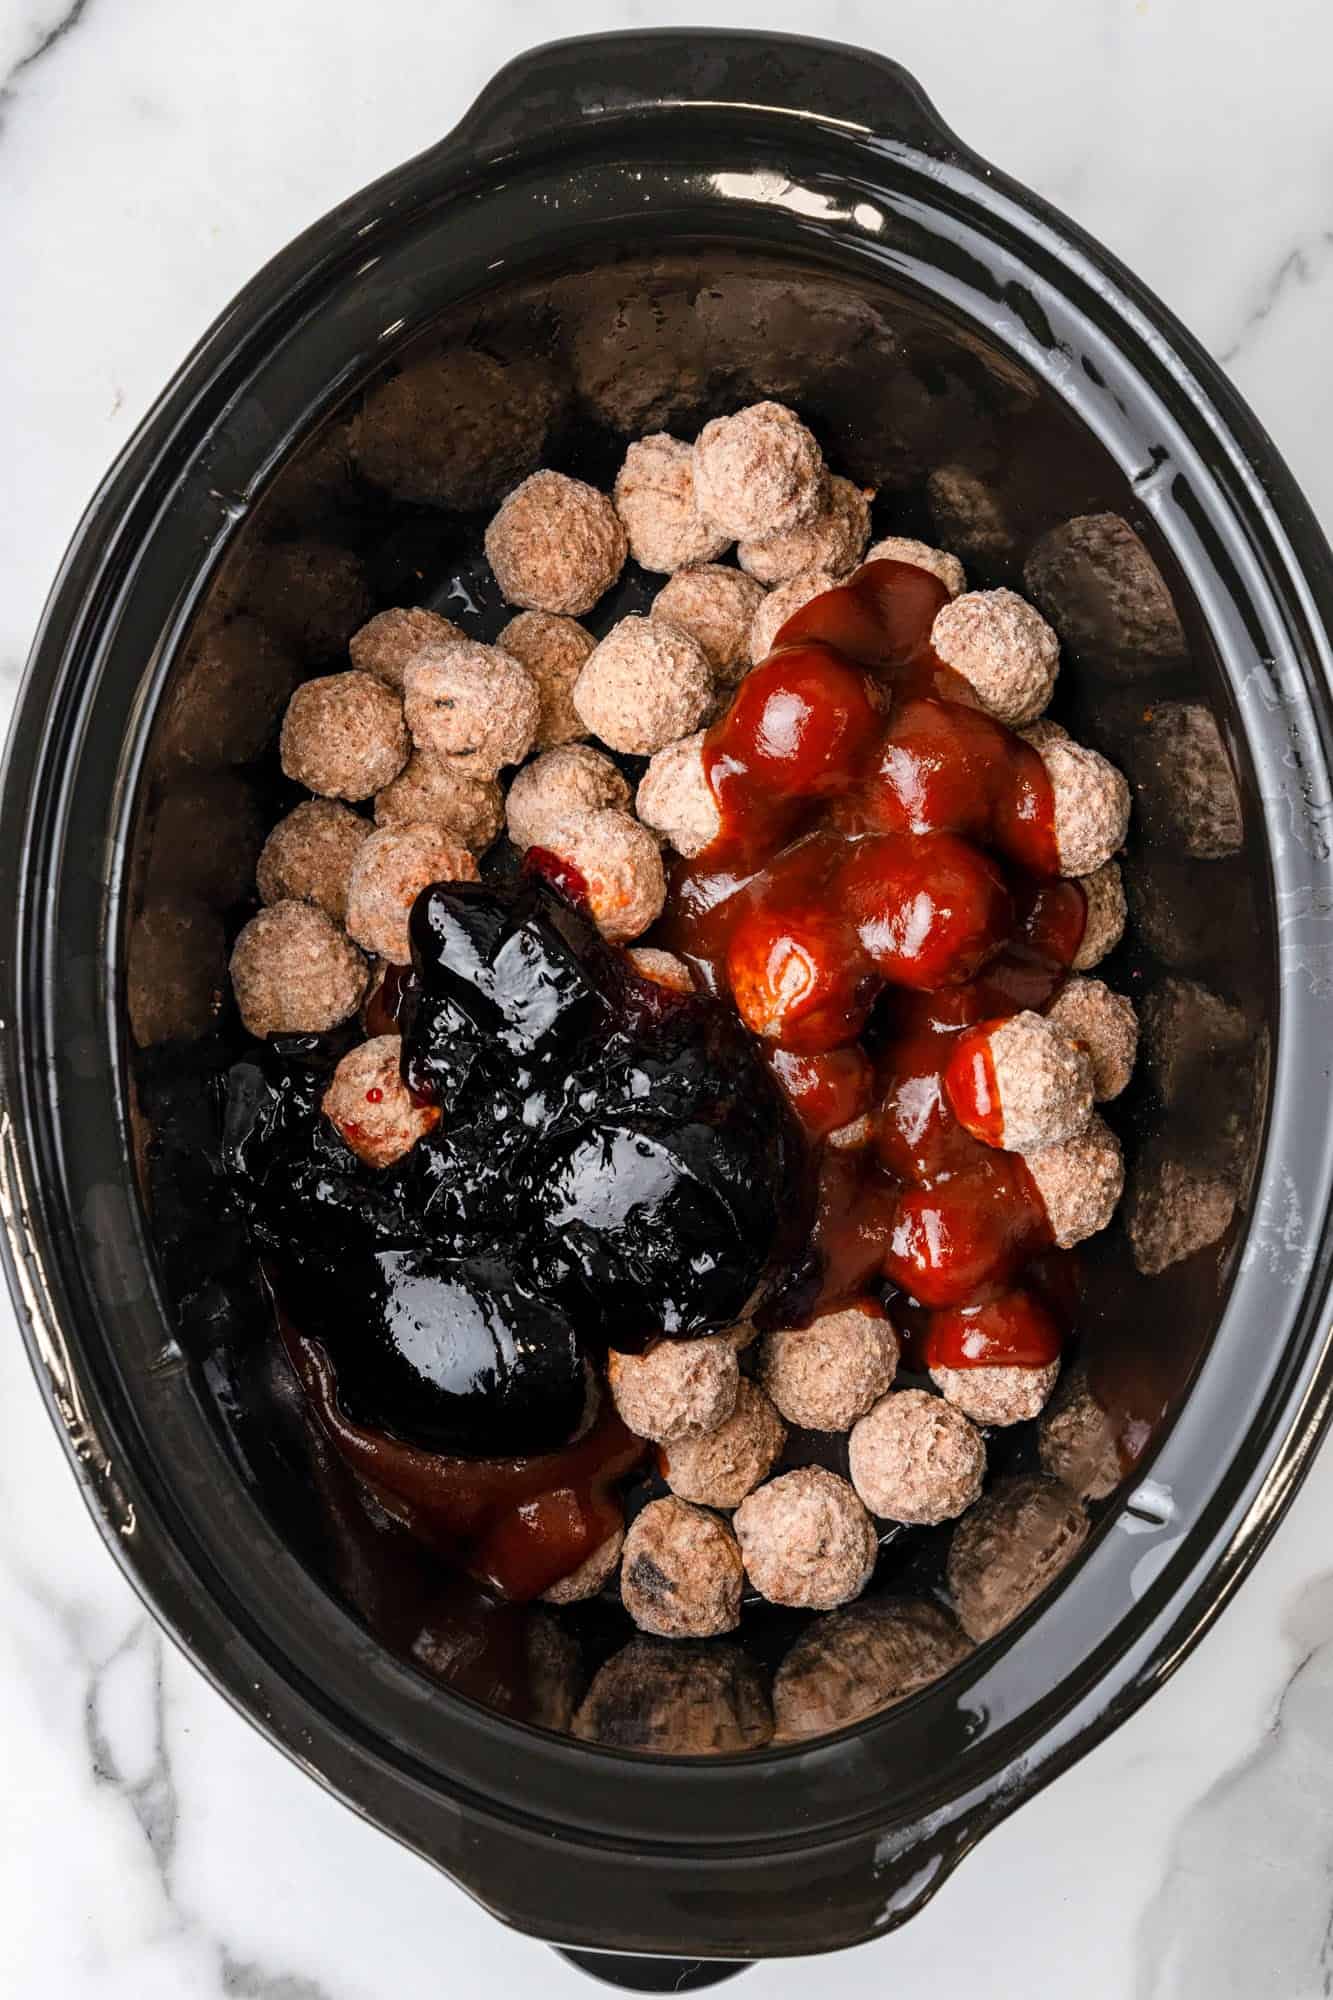 Overhead shot of a slow cooker with meatballs, bbq sauce, and grapejelly sauce.